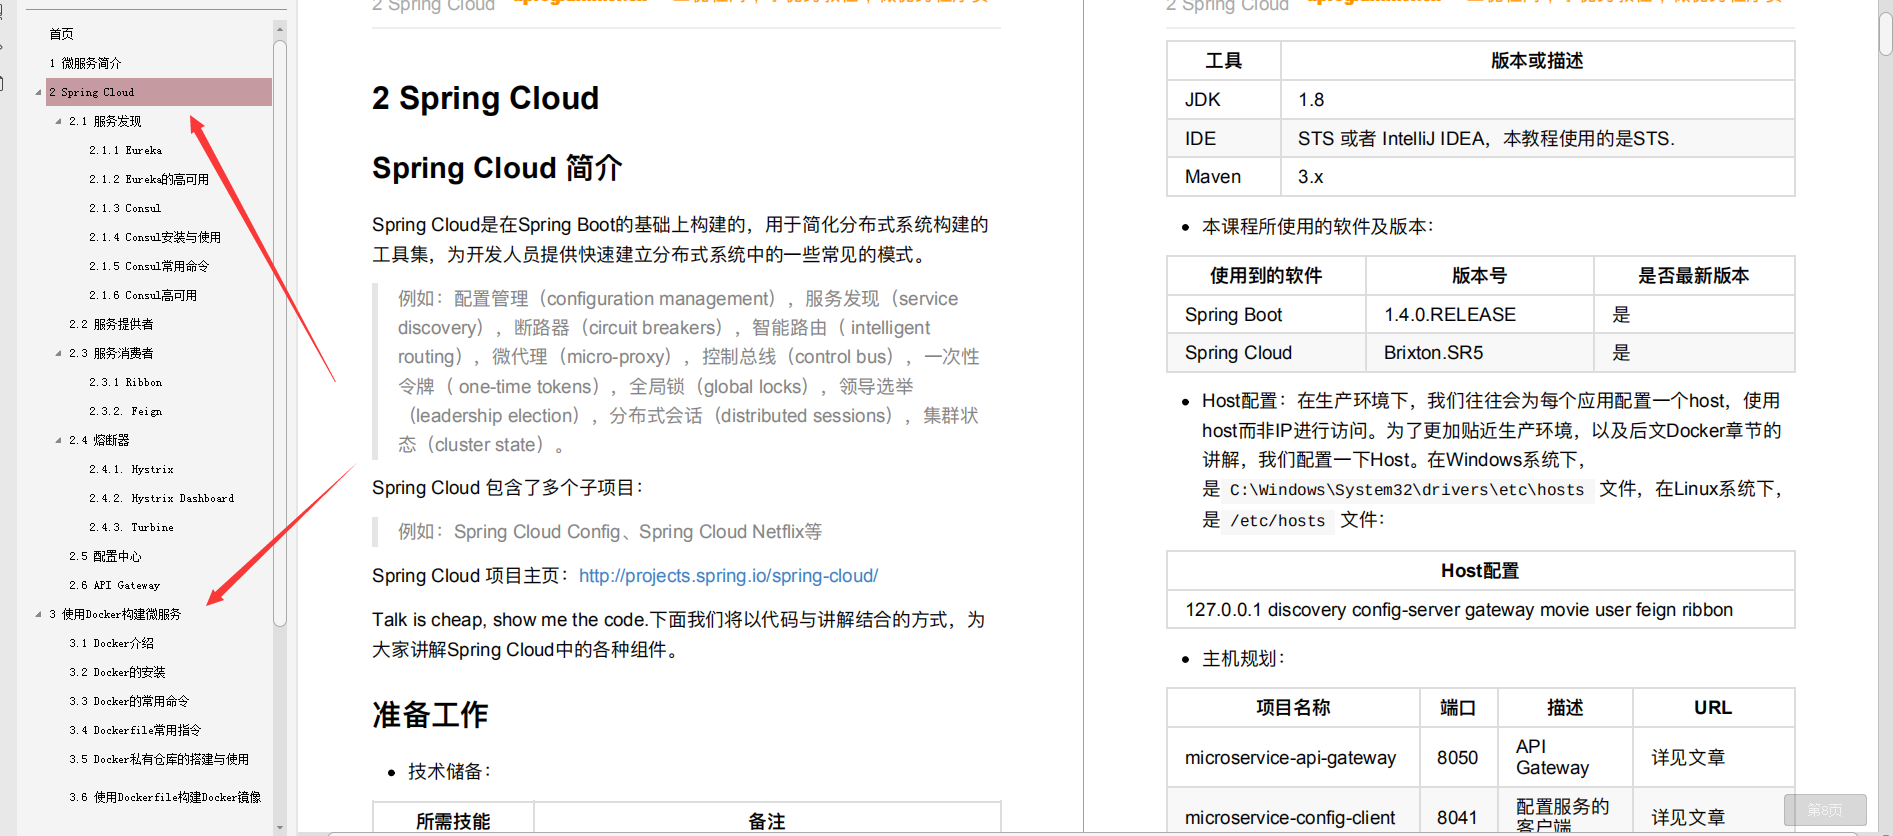 Interviewed with 22 companies, forced me to fully understand the source code, and finally successfully landed on Alibaba Cloud